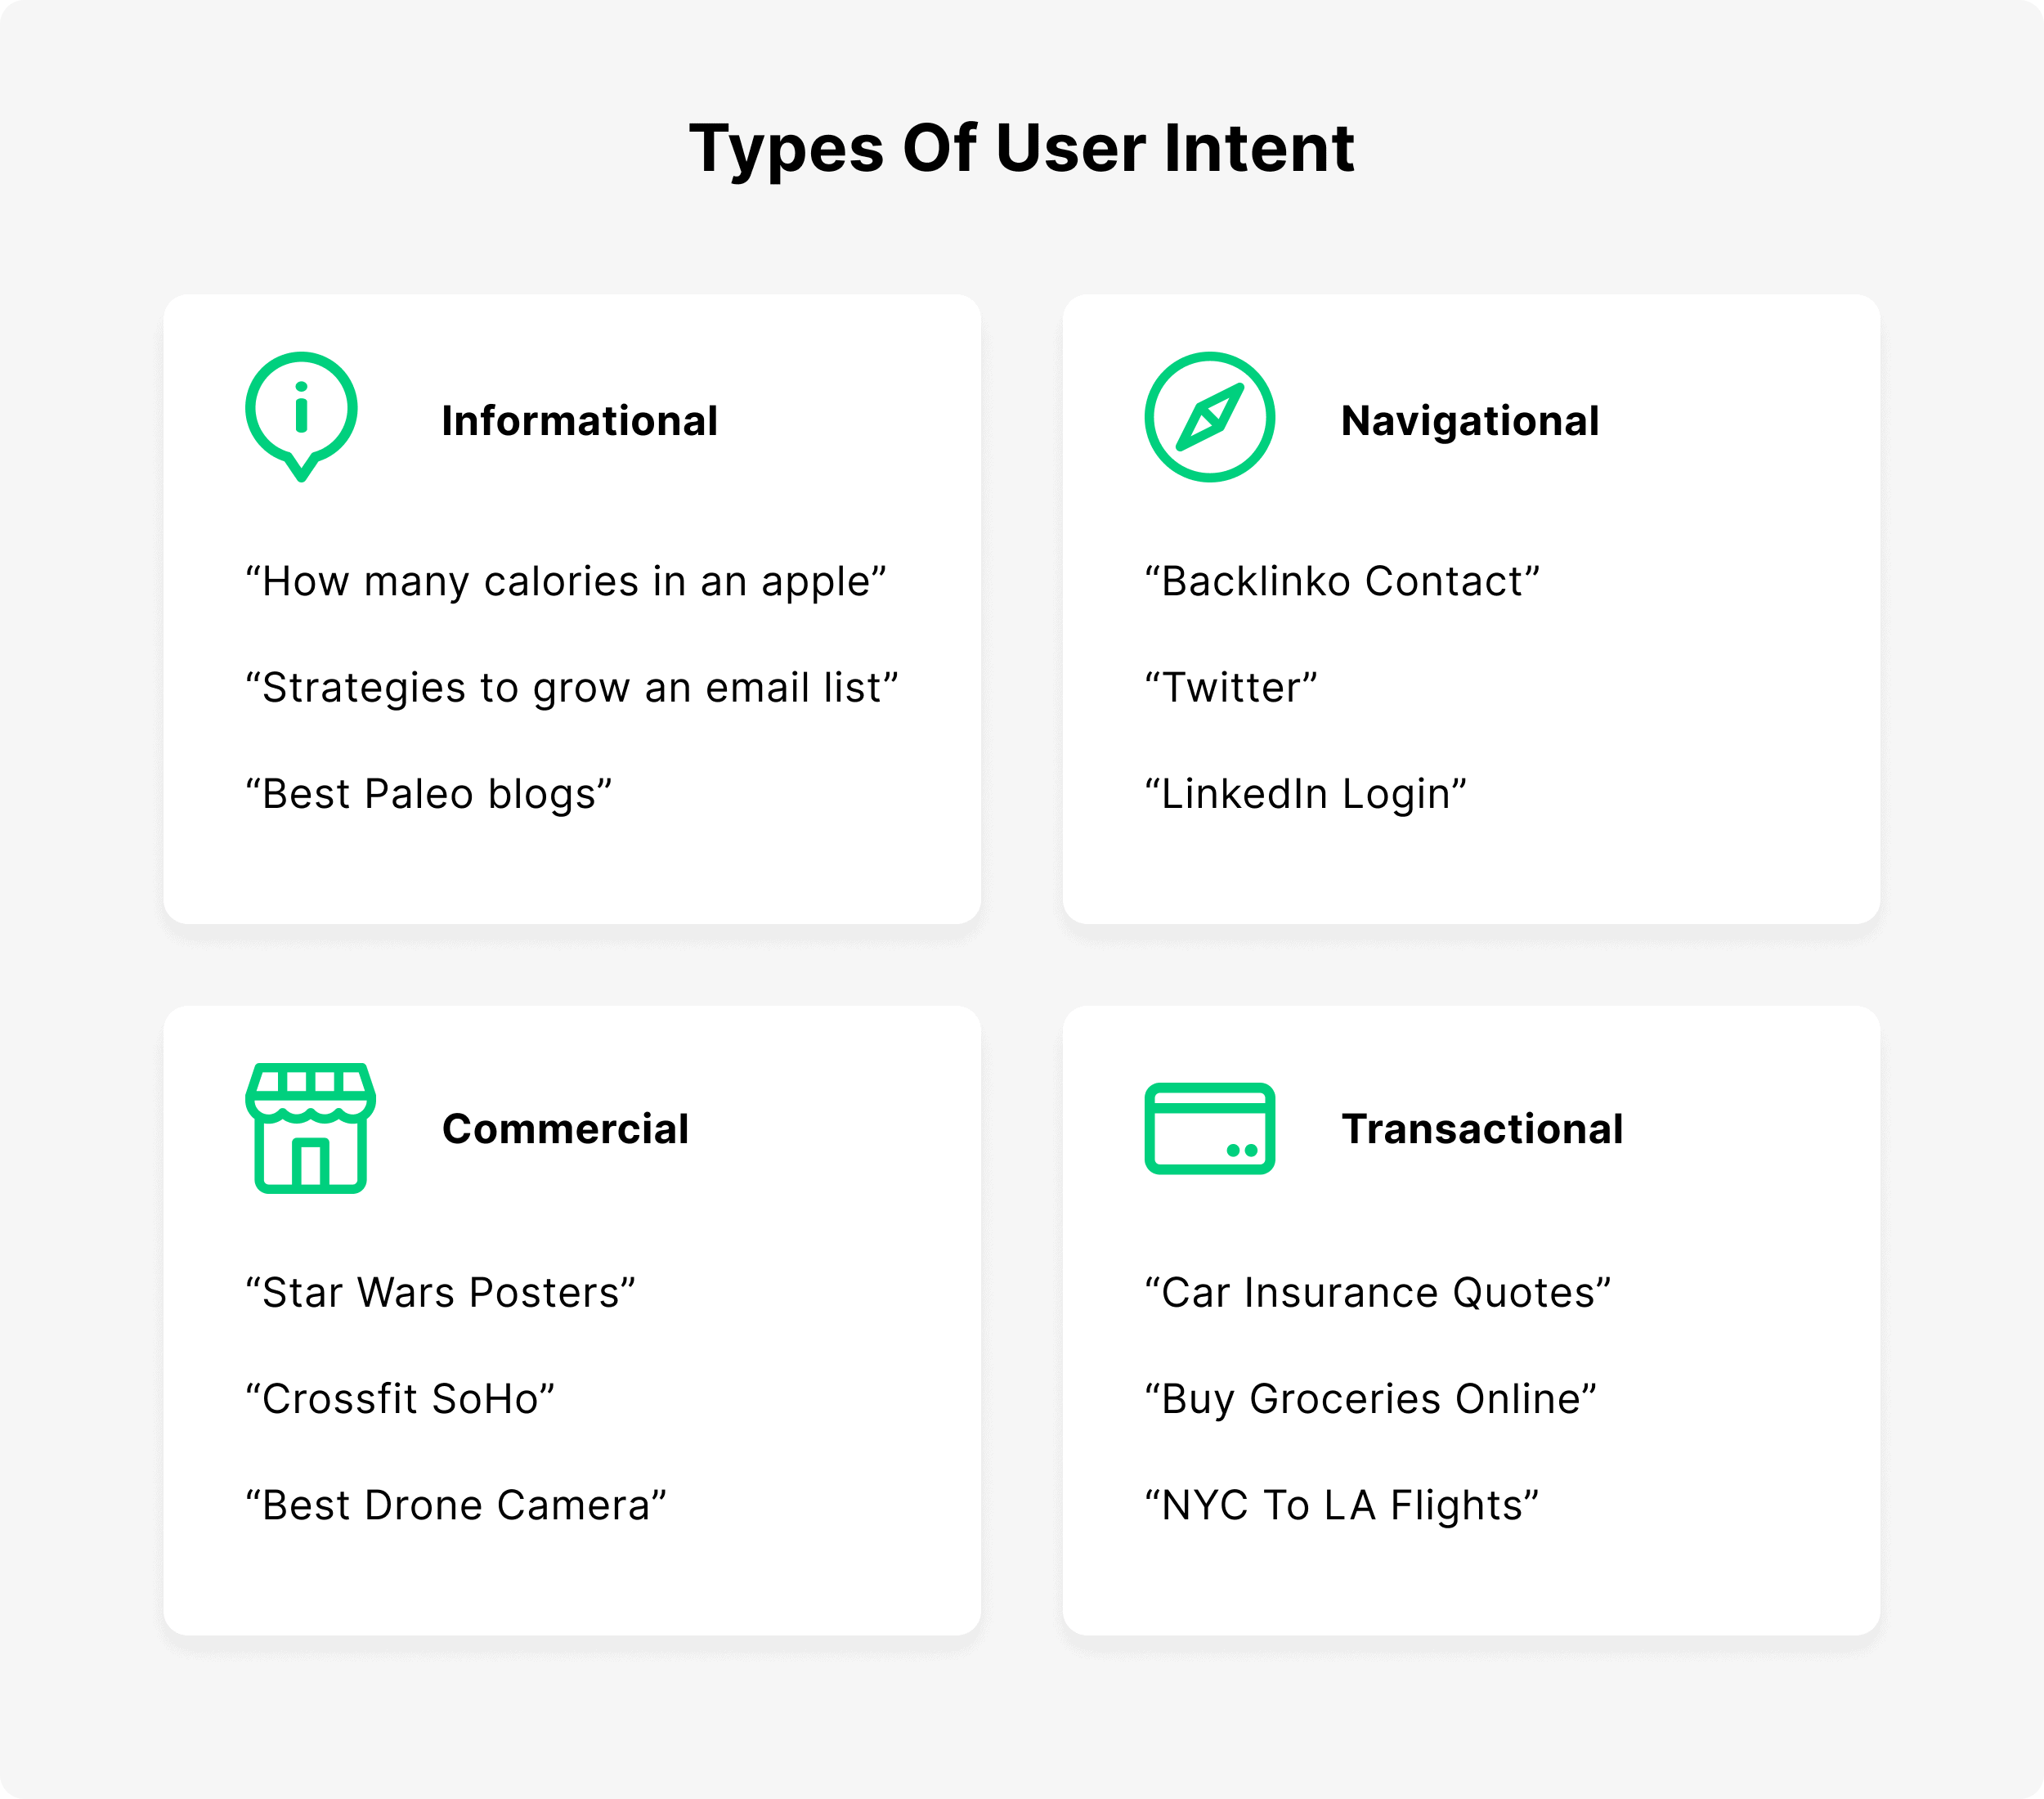 Types of user Intent